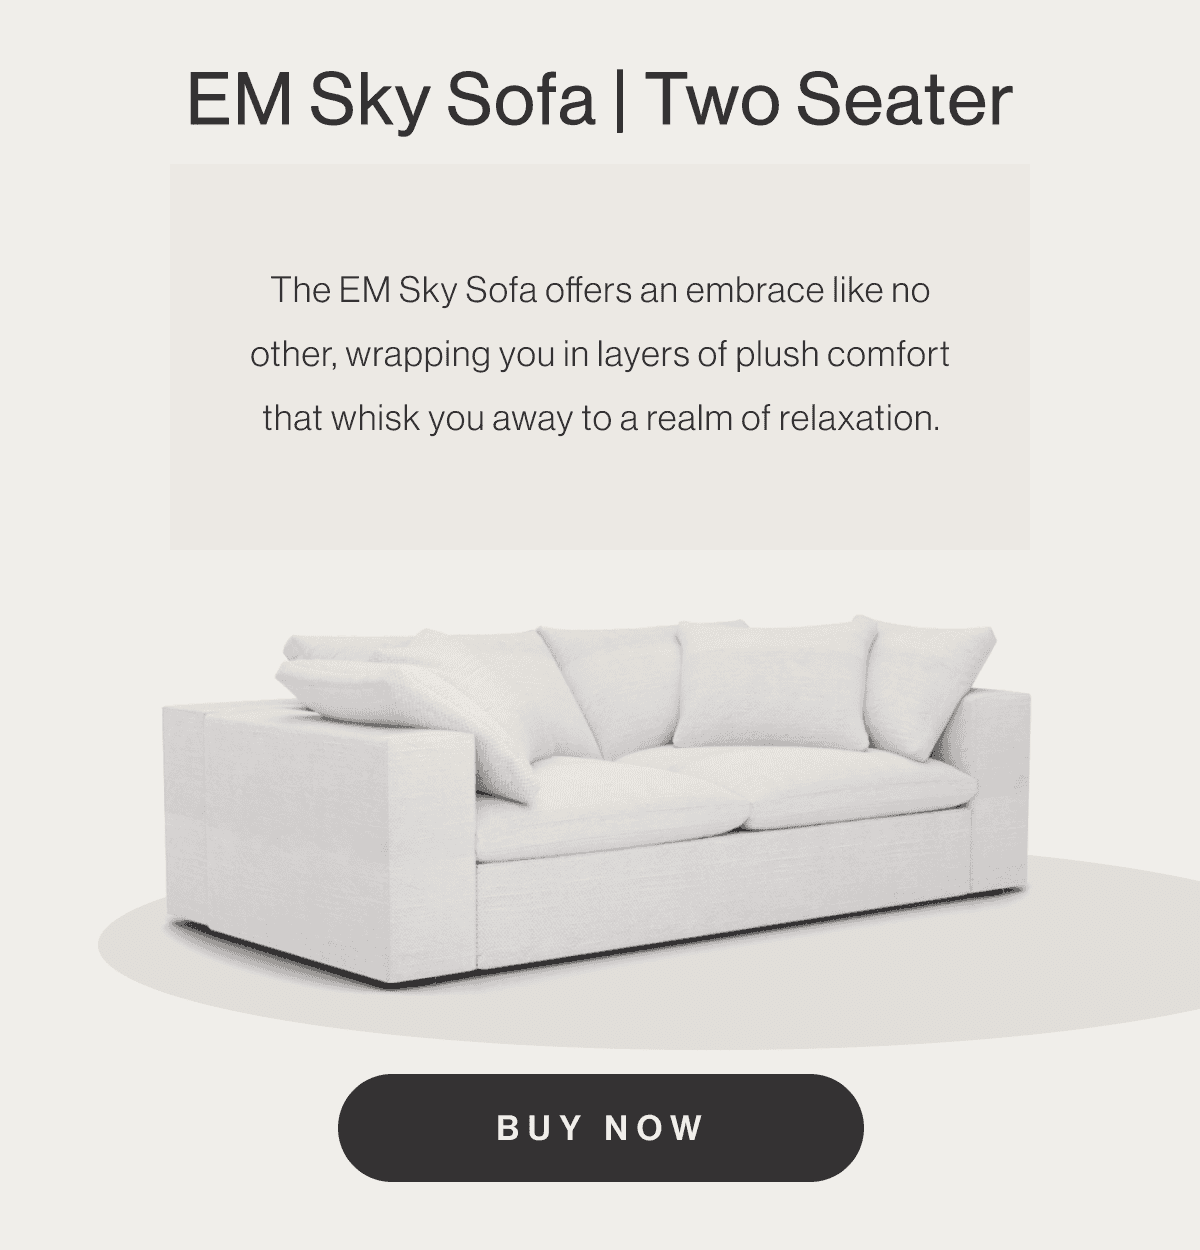 EM Sky Sofa Two Seater - The EM Sky Sofa offers an embrace like no other, wrapping you in layers of plush comfort that whisk you away to a realm of relaxation. - Buy Now